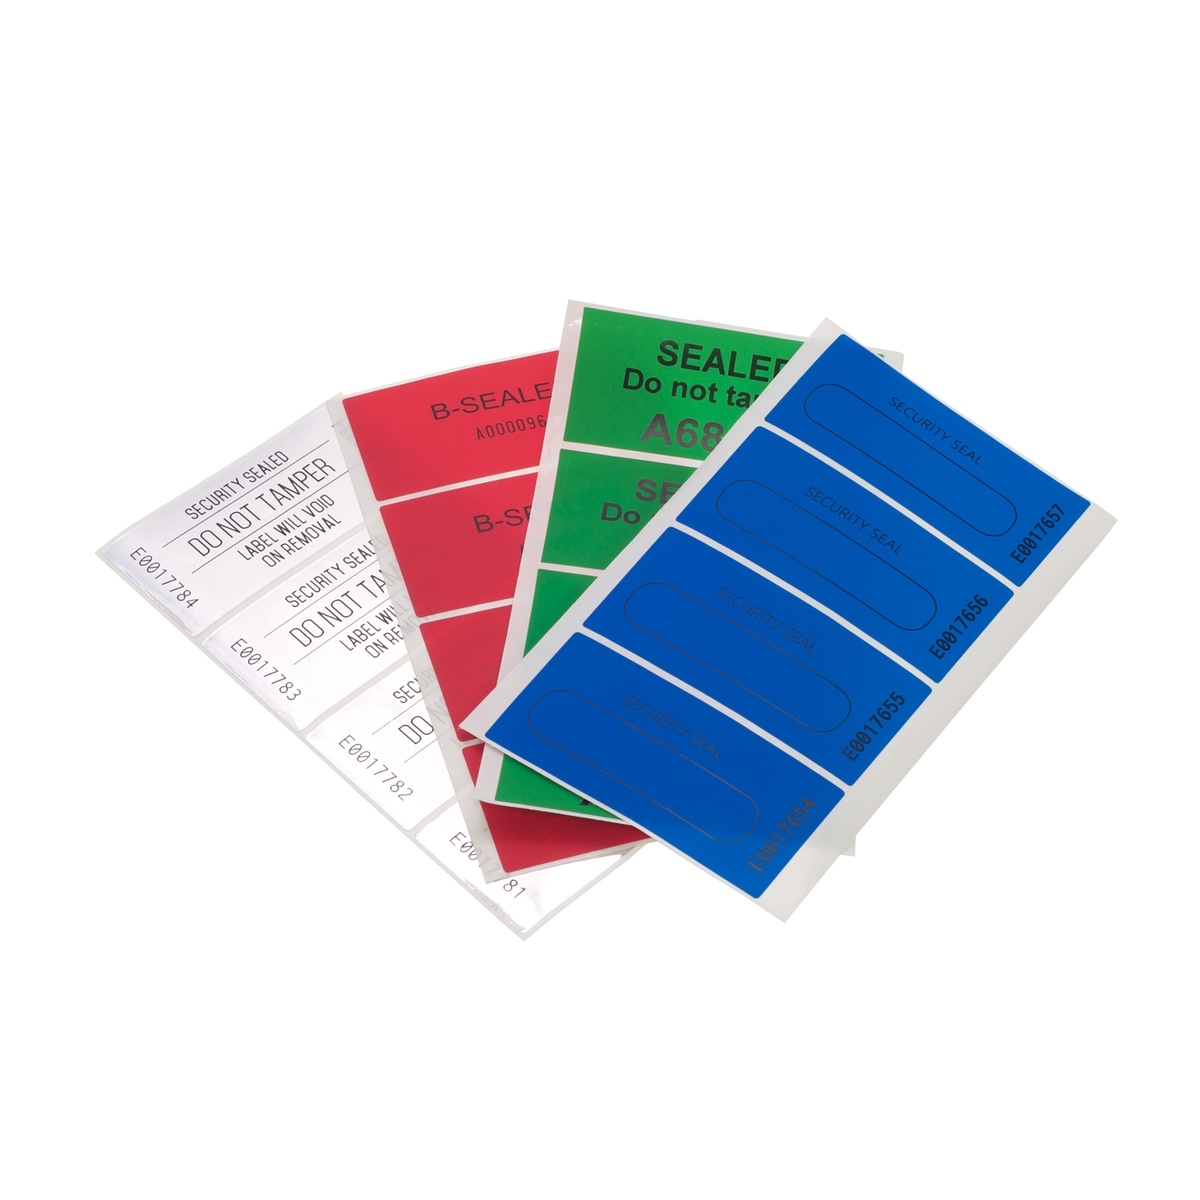 X-Safe 85x40mm Total-Transfer Label @ Security Seals Online by B-Sealed